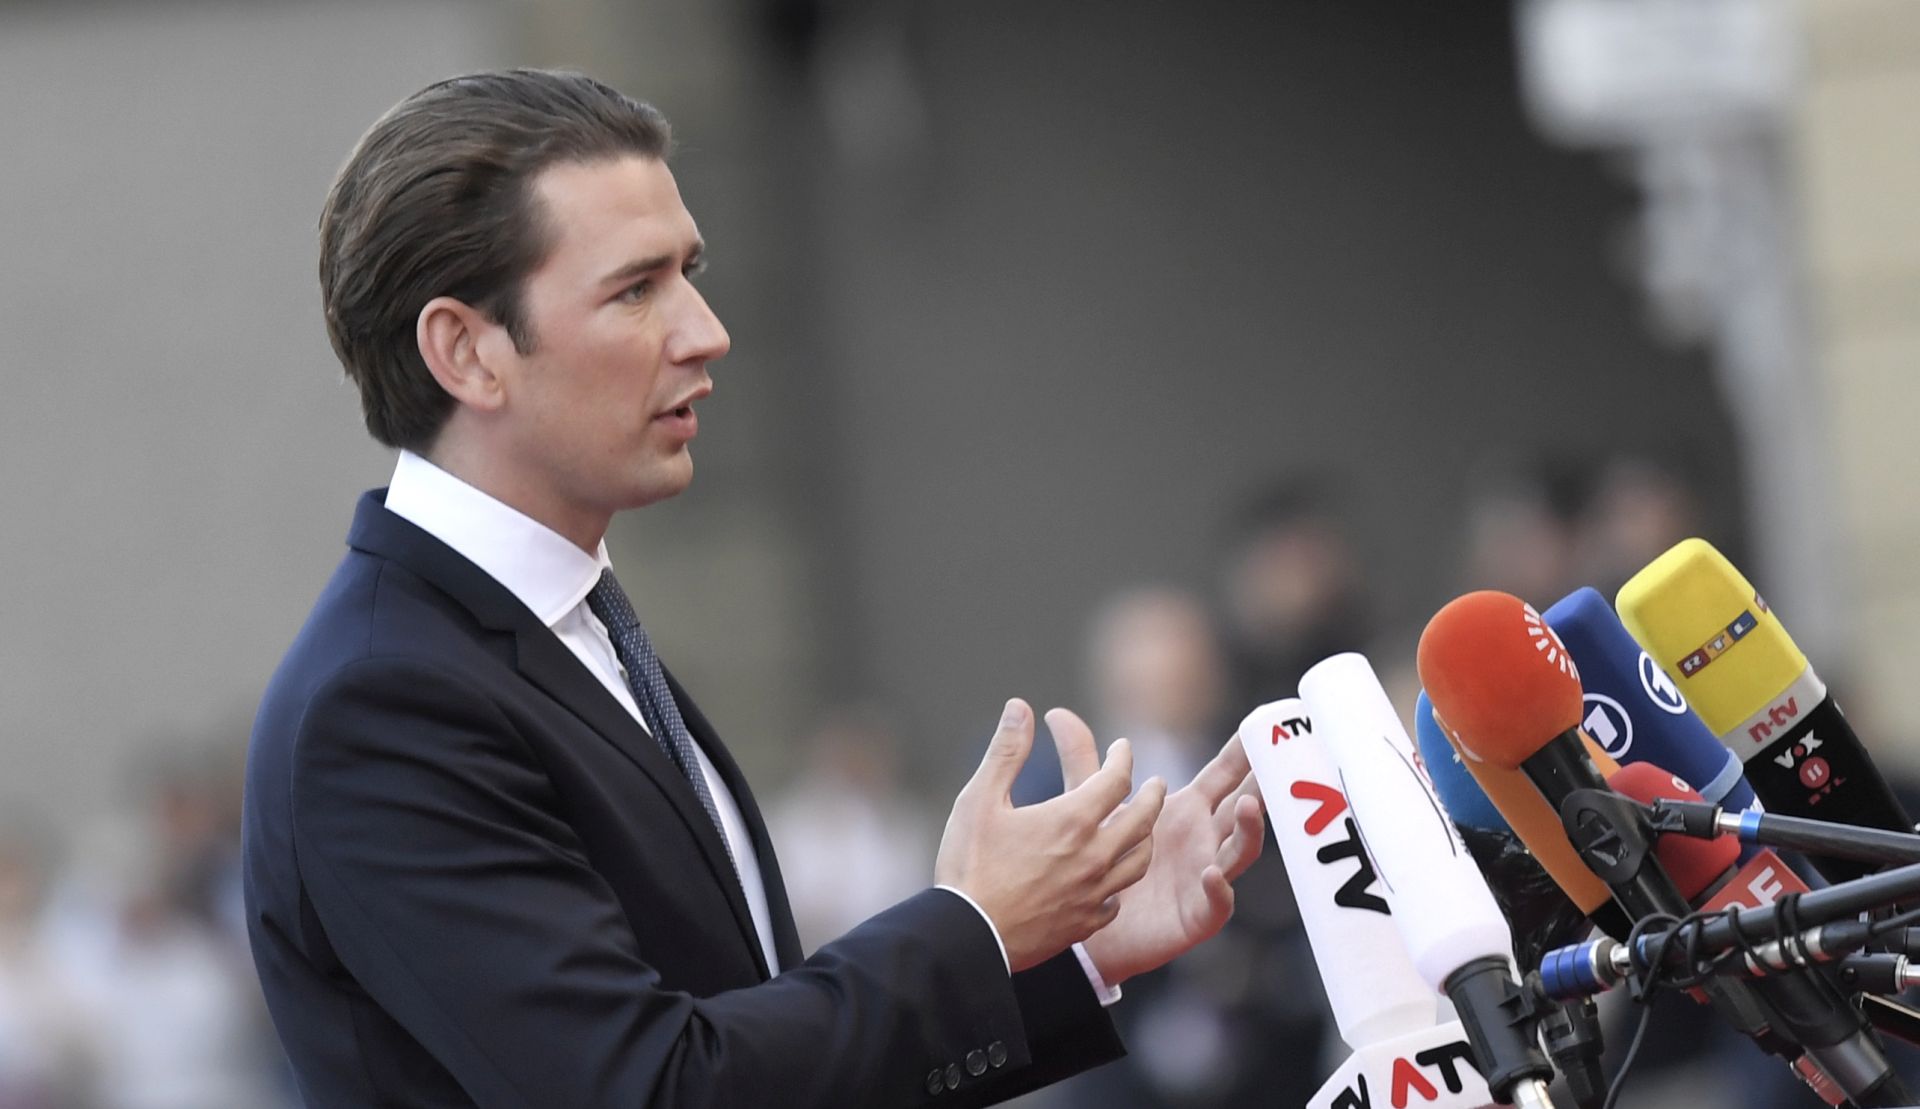 epa07032519 Federal Chancellor of Austria Sebastian Kurz speaks to the media as he arrives for a dinner at the Felsenreitschule theatre, during the European Union's (EU) Informal Heads of State Summit in Salzburg, Austria, 19 September 2018. EU countries' leaders meet on 19 and 20 September for a summit to discuss internal security measures, migration and Brexit.  EPA/CHRISTIAN BRUNA